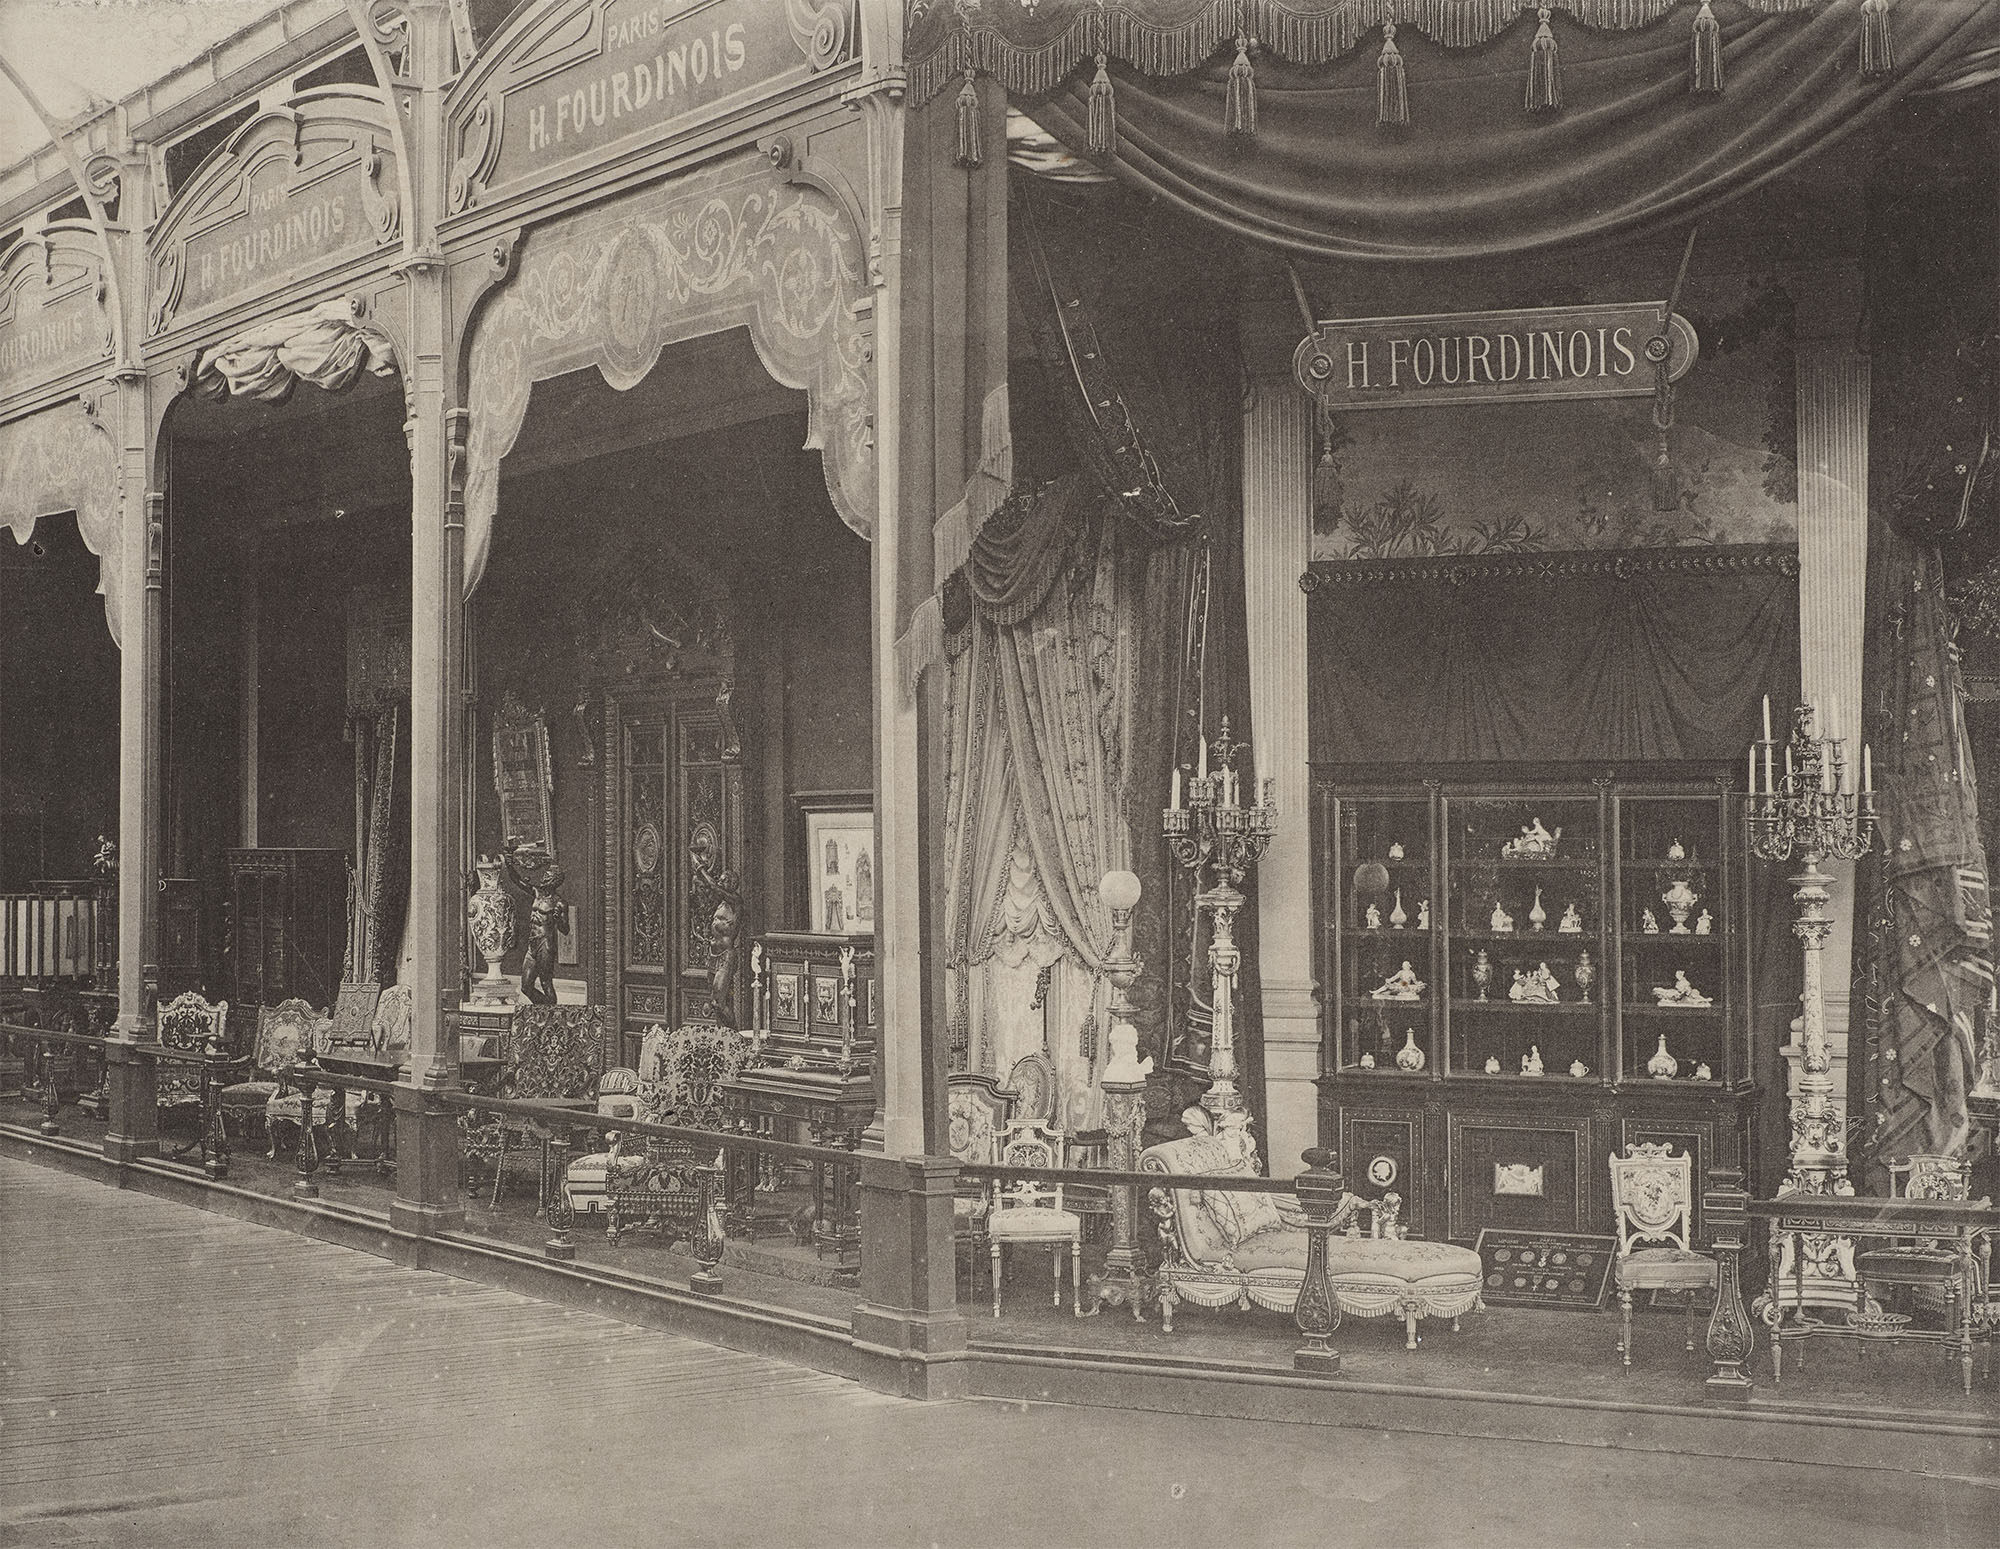 Fourdinois booth in the International Exhibition of 1878